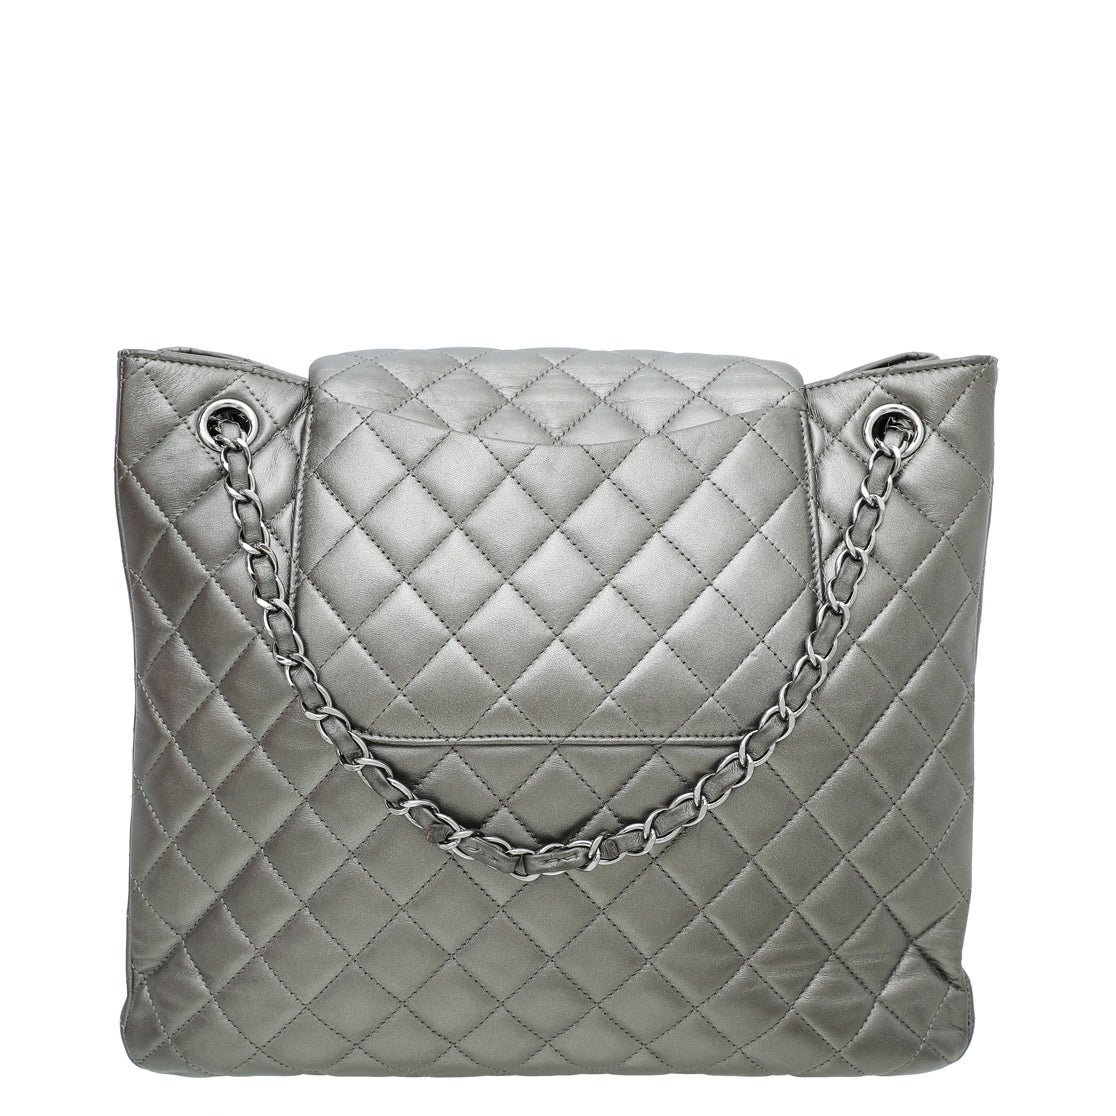 CHANEL Grained Calfskin Small CC Pocket Tote Grey 480289